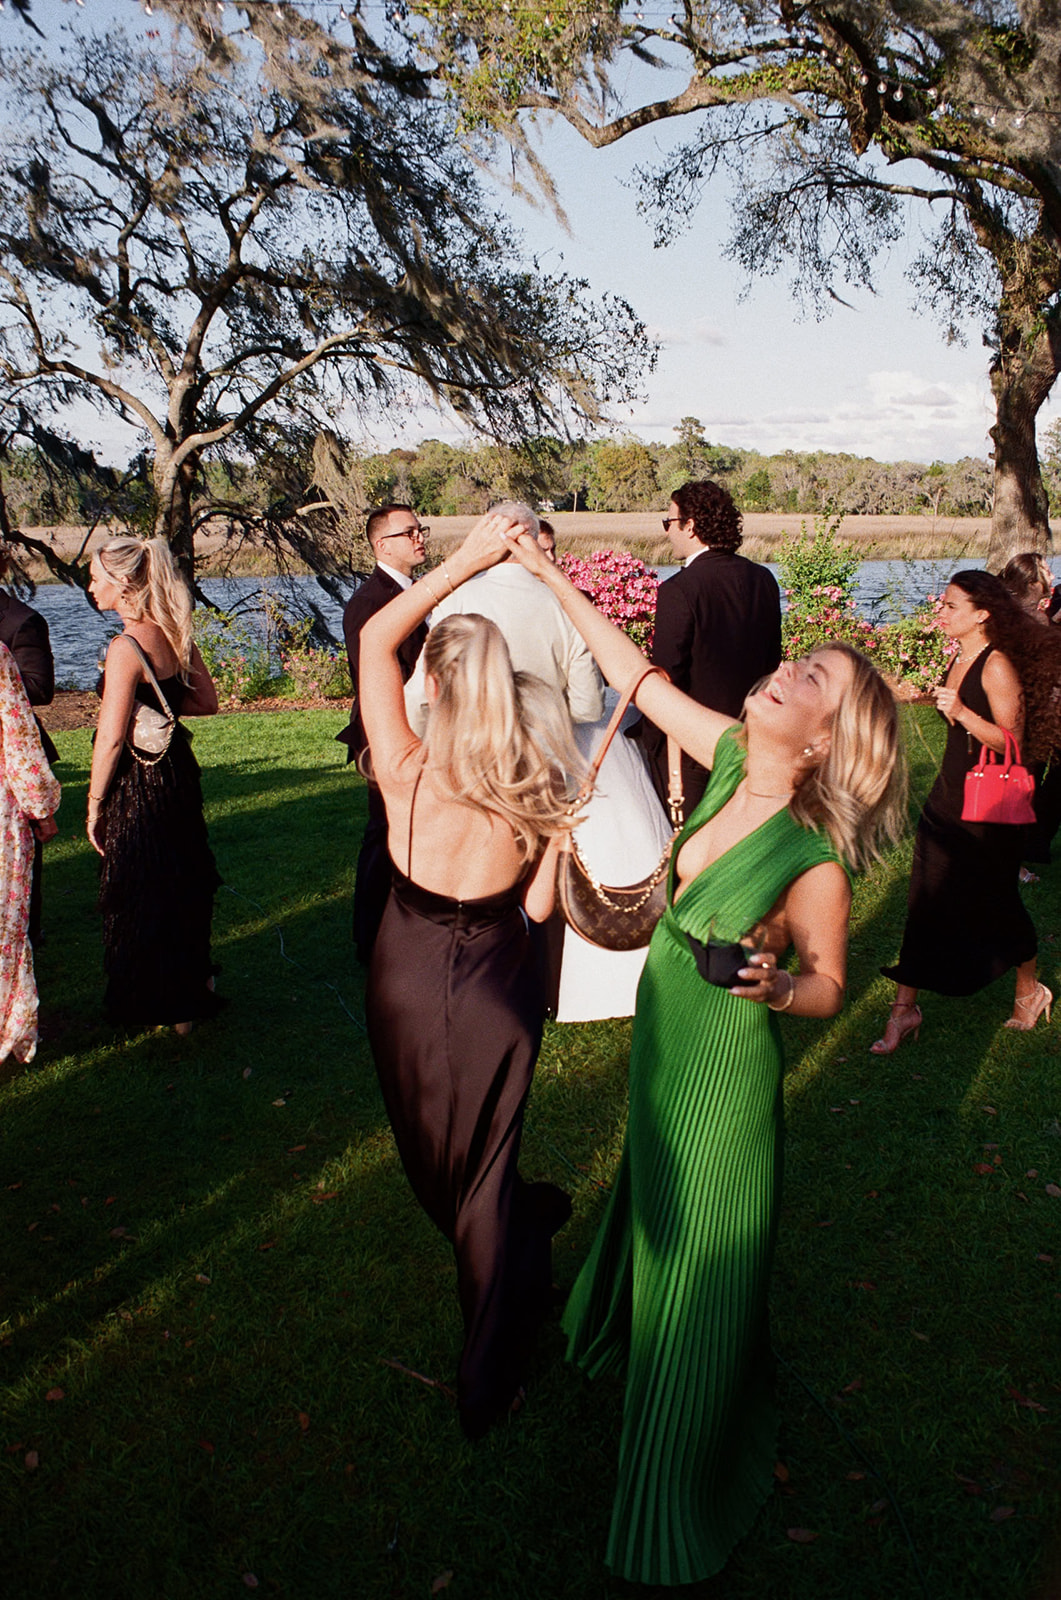 Wedding guests dancing during cocktail hour. Moment captured on film